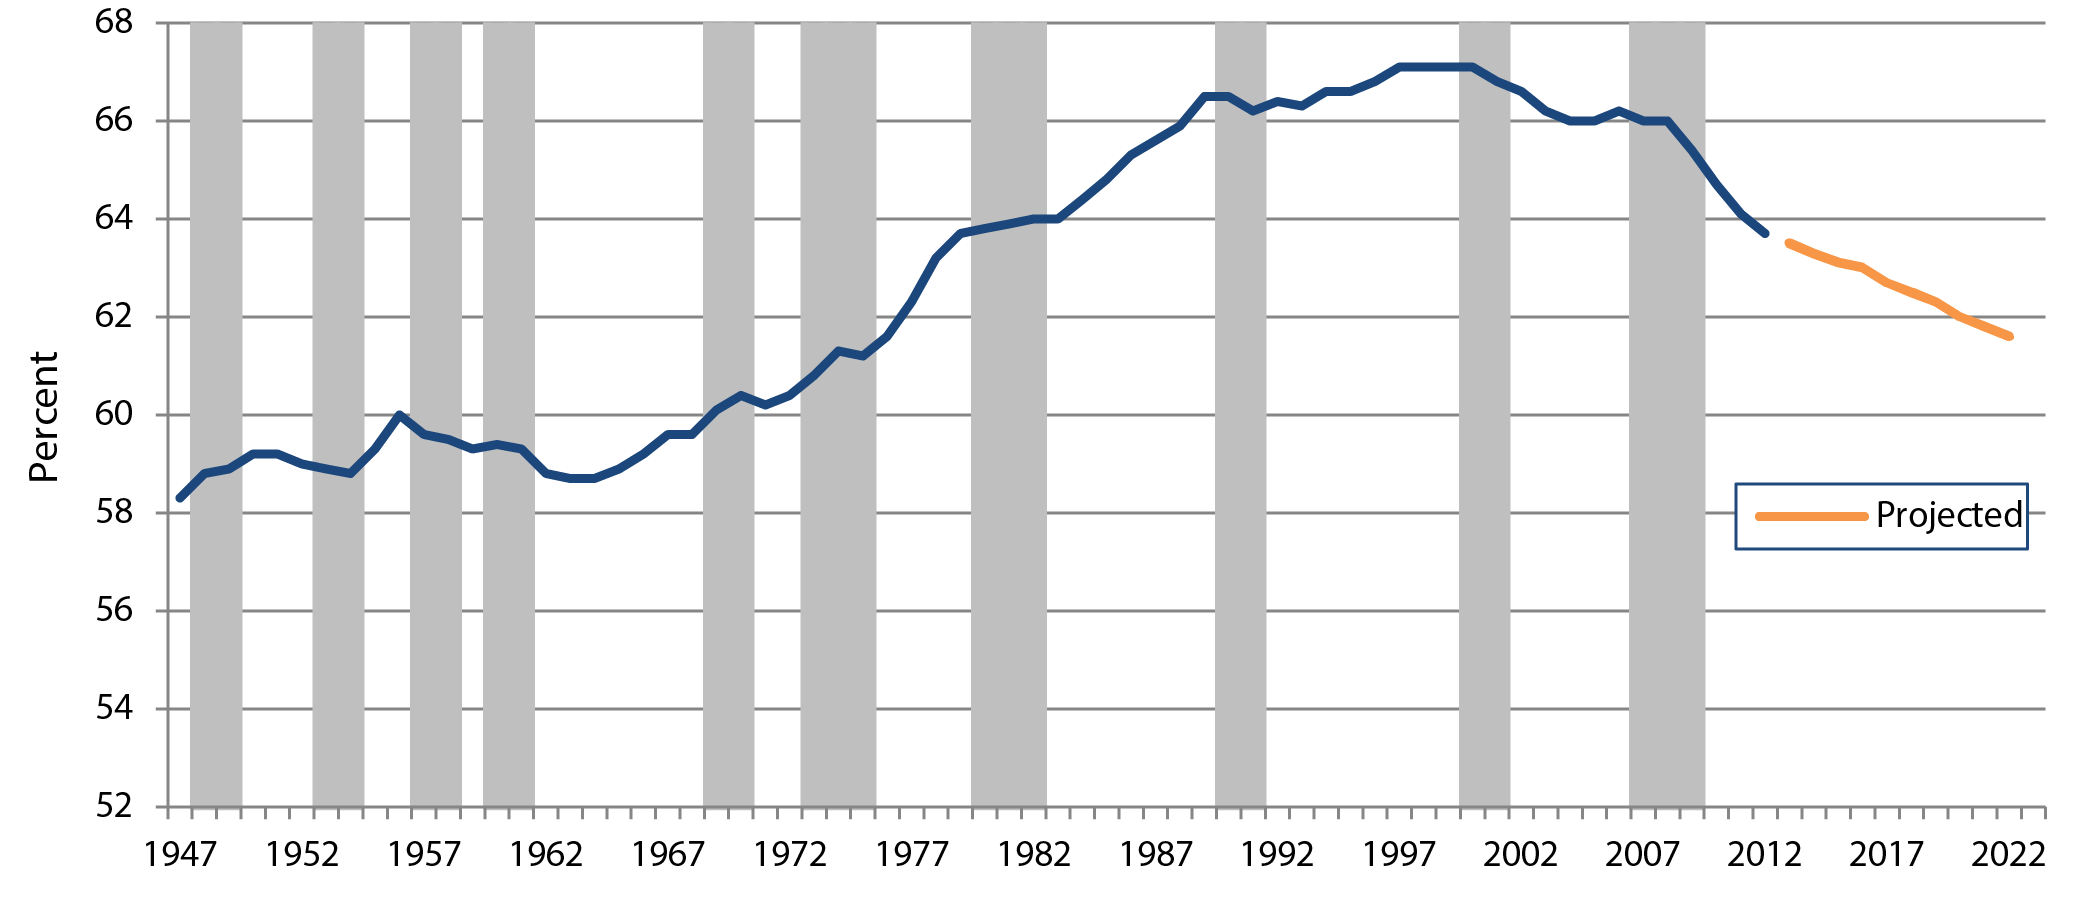 A line chart displays the labor force participation rate in percentages from 1947—2012 and projected 2022. The trend begins at 58.3 percent in 1947 and increases to approximately 60 percent in 1956. It then slopes downward to 58.7 percent in 1963 before it steadily increases to its highest points: around 67 percent throughout the 1990s. The trend decreases to about 65 percent starting around  2010 and ends at 63.7 percent in 2012. The trend is projected to continue to decrease from 2012-2022 to just below 62 percent in 2022. Shaded portions of the chart represent recessions as designated by the National Bureau of Economic Research and these occur at November 1948—October 1949; July 1953—May 1954; August 1957—April 1958; April 1960—February 1961; December 1969—November 1970; November 1973—March 1975; January 1980—July 1980; July 1981—November 1982; July 1990—March 1991; March 2001—November 2001; and December 2007—June 2009. Source: U.S. Bureau of Labor Statistics.